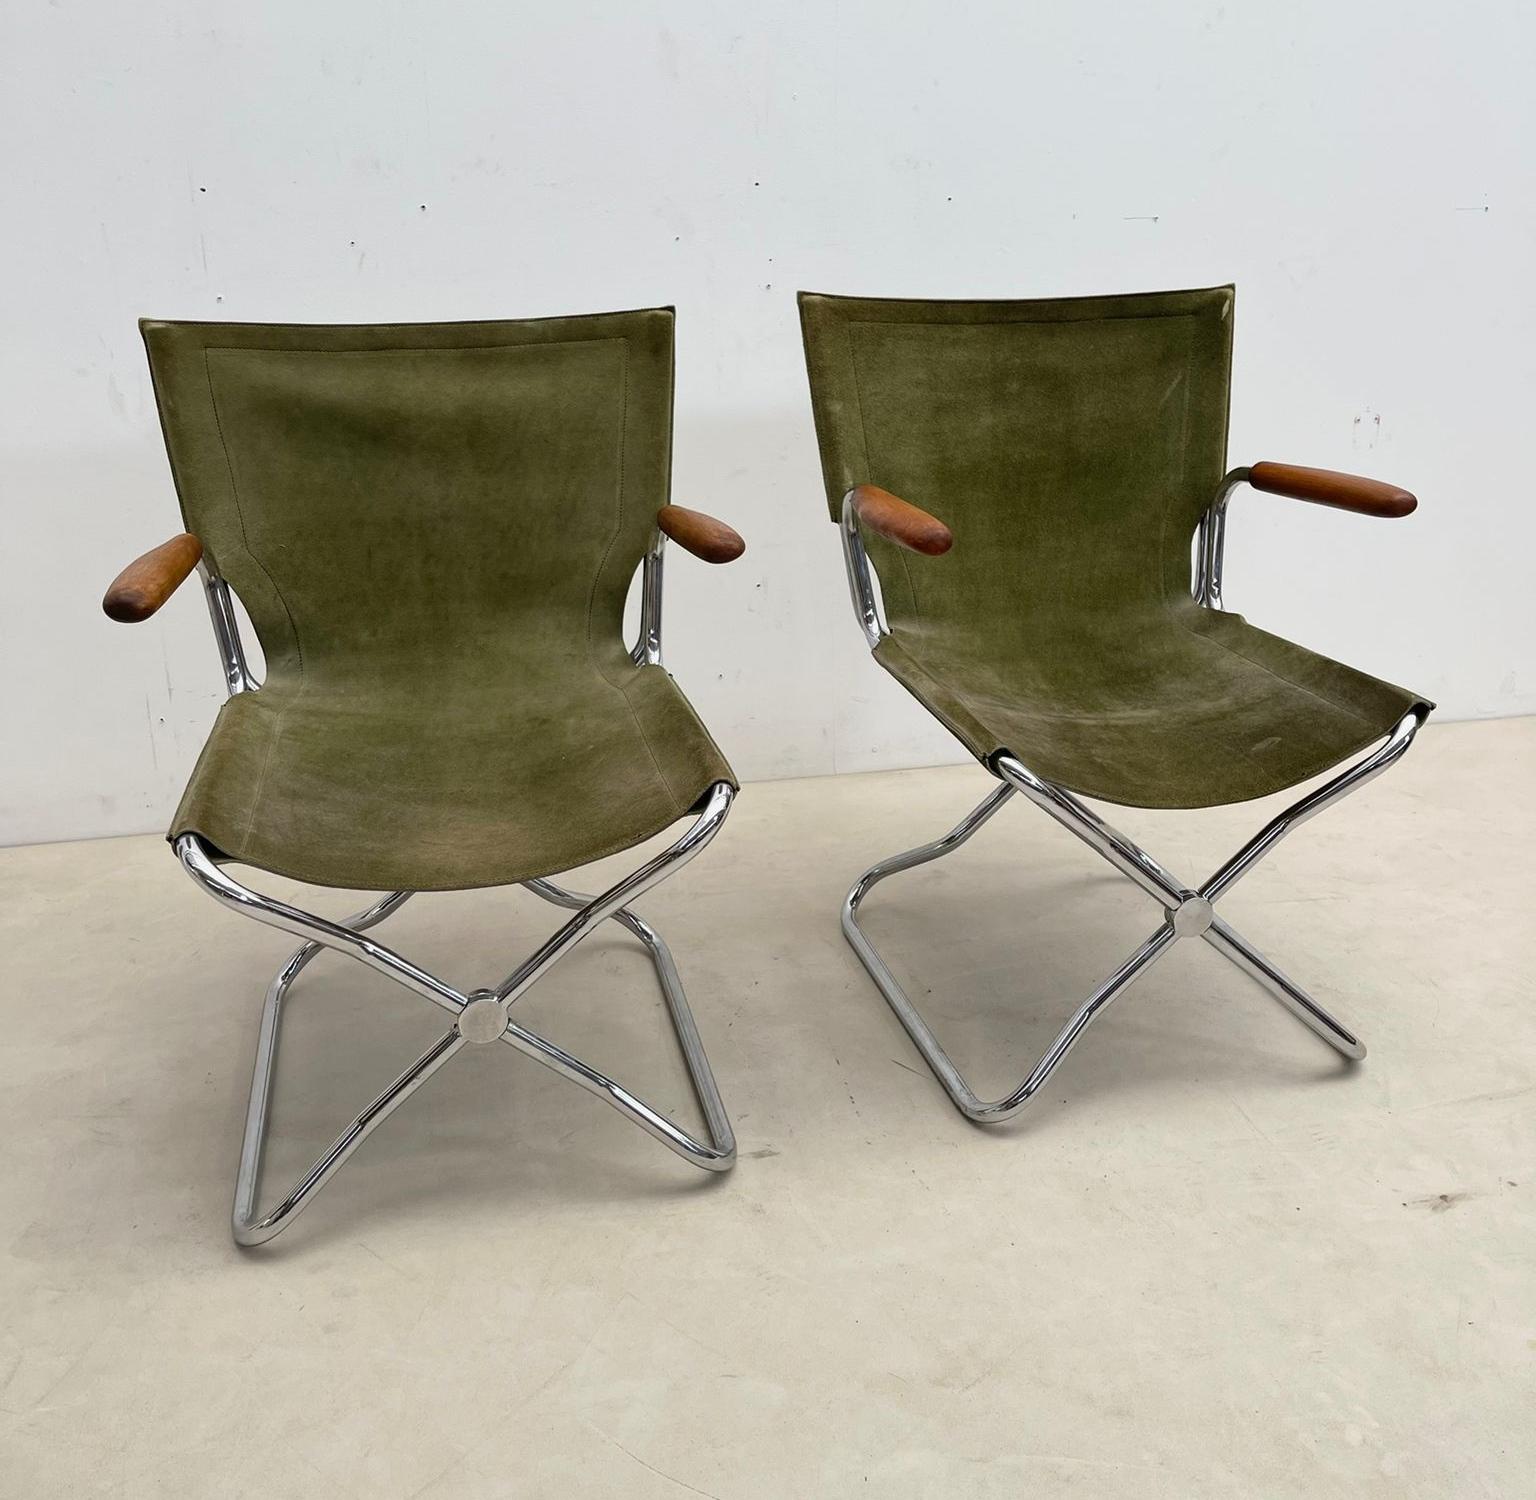 Set of 4 mid-century wood metal and green canvas folding armchairs.